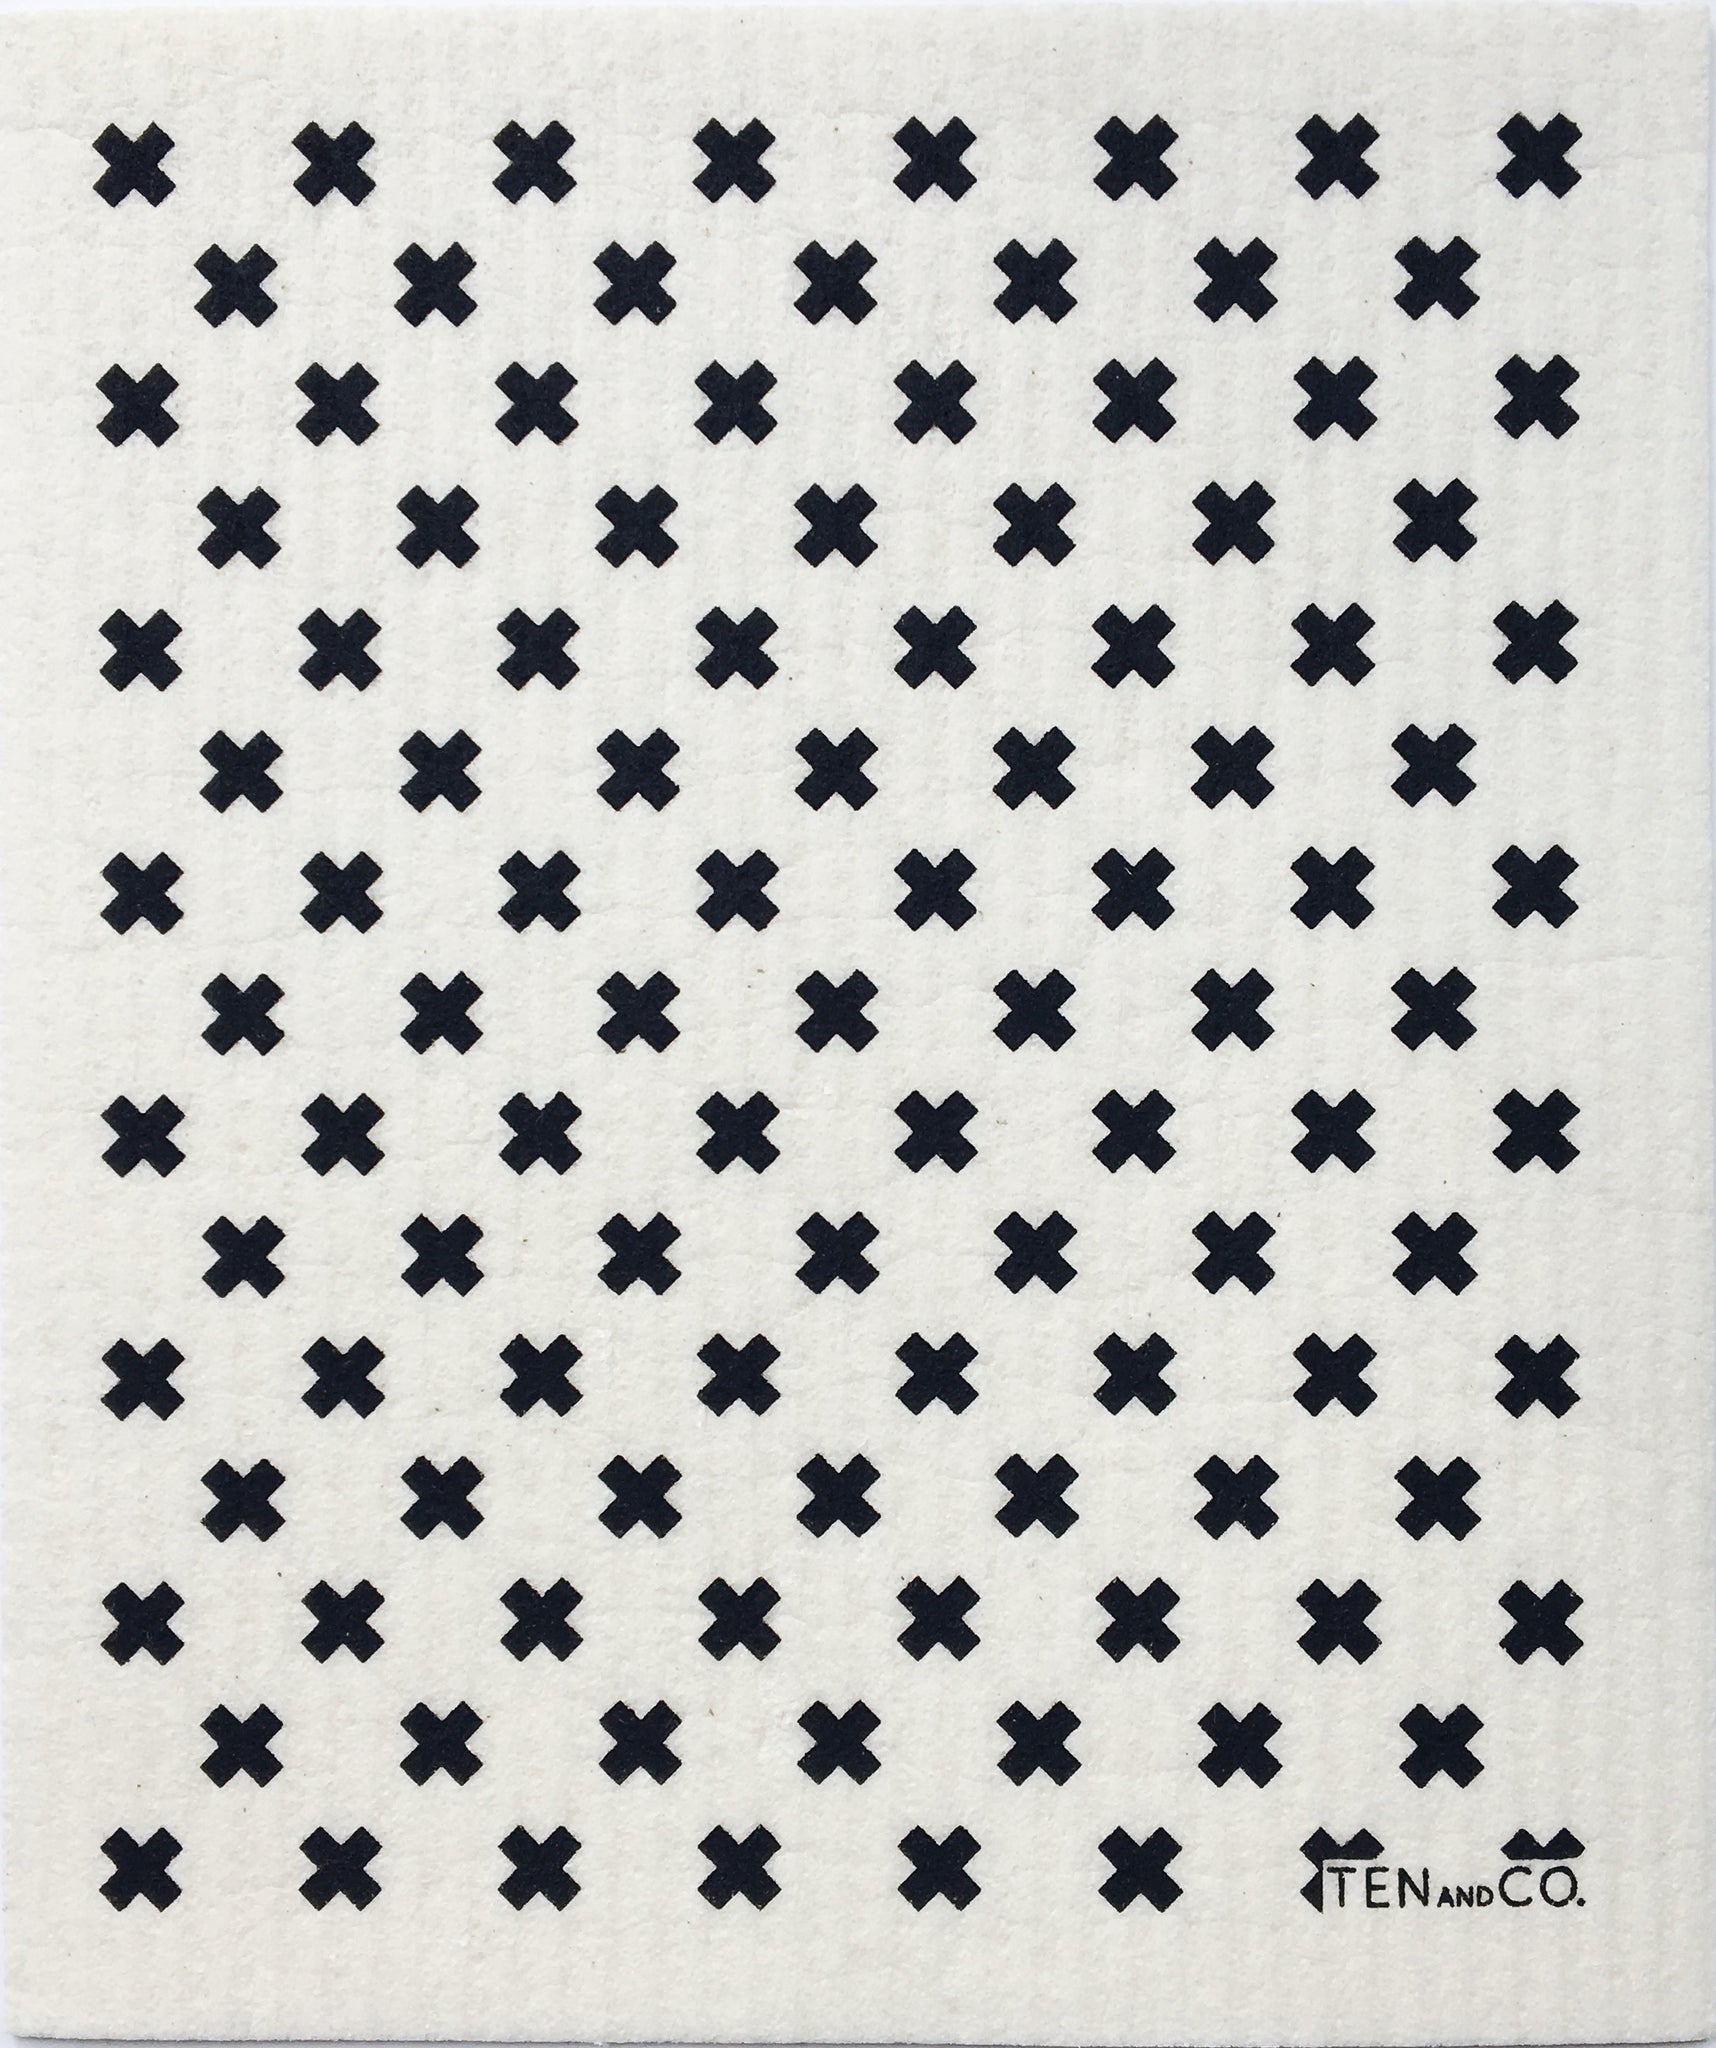 White dishcloths with black x's in a pattern covering it